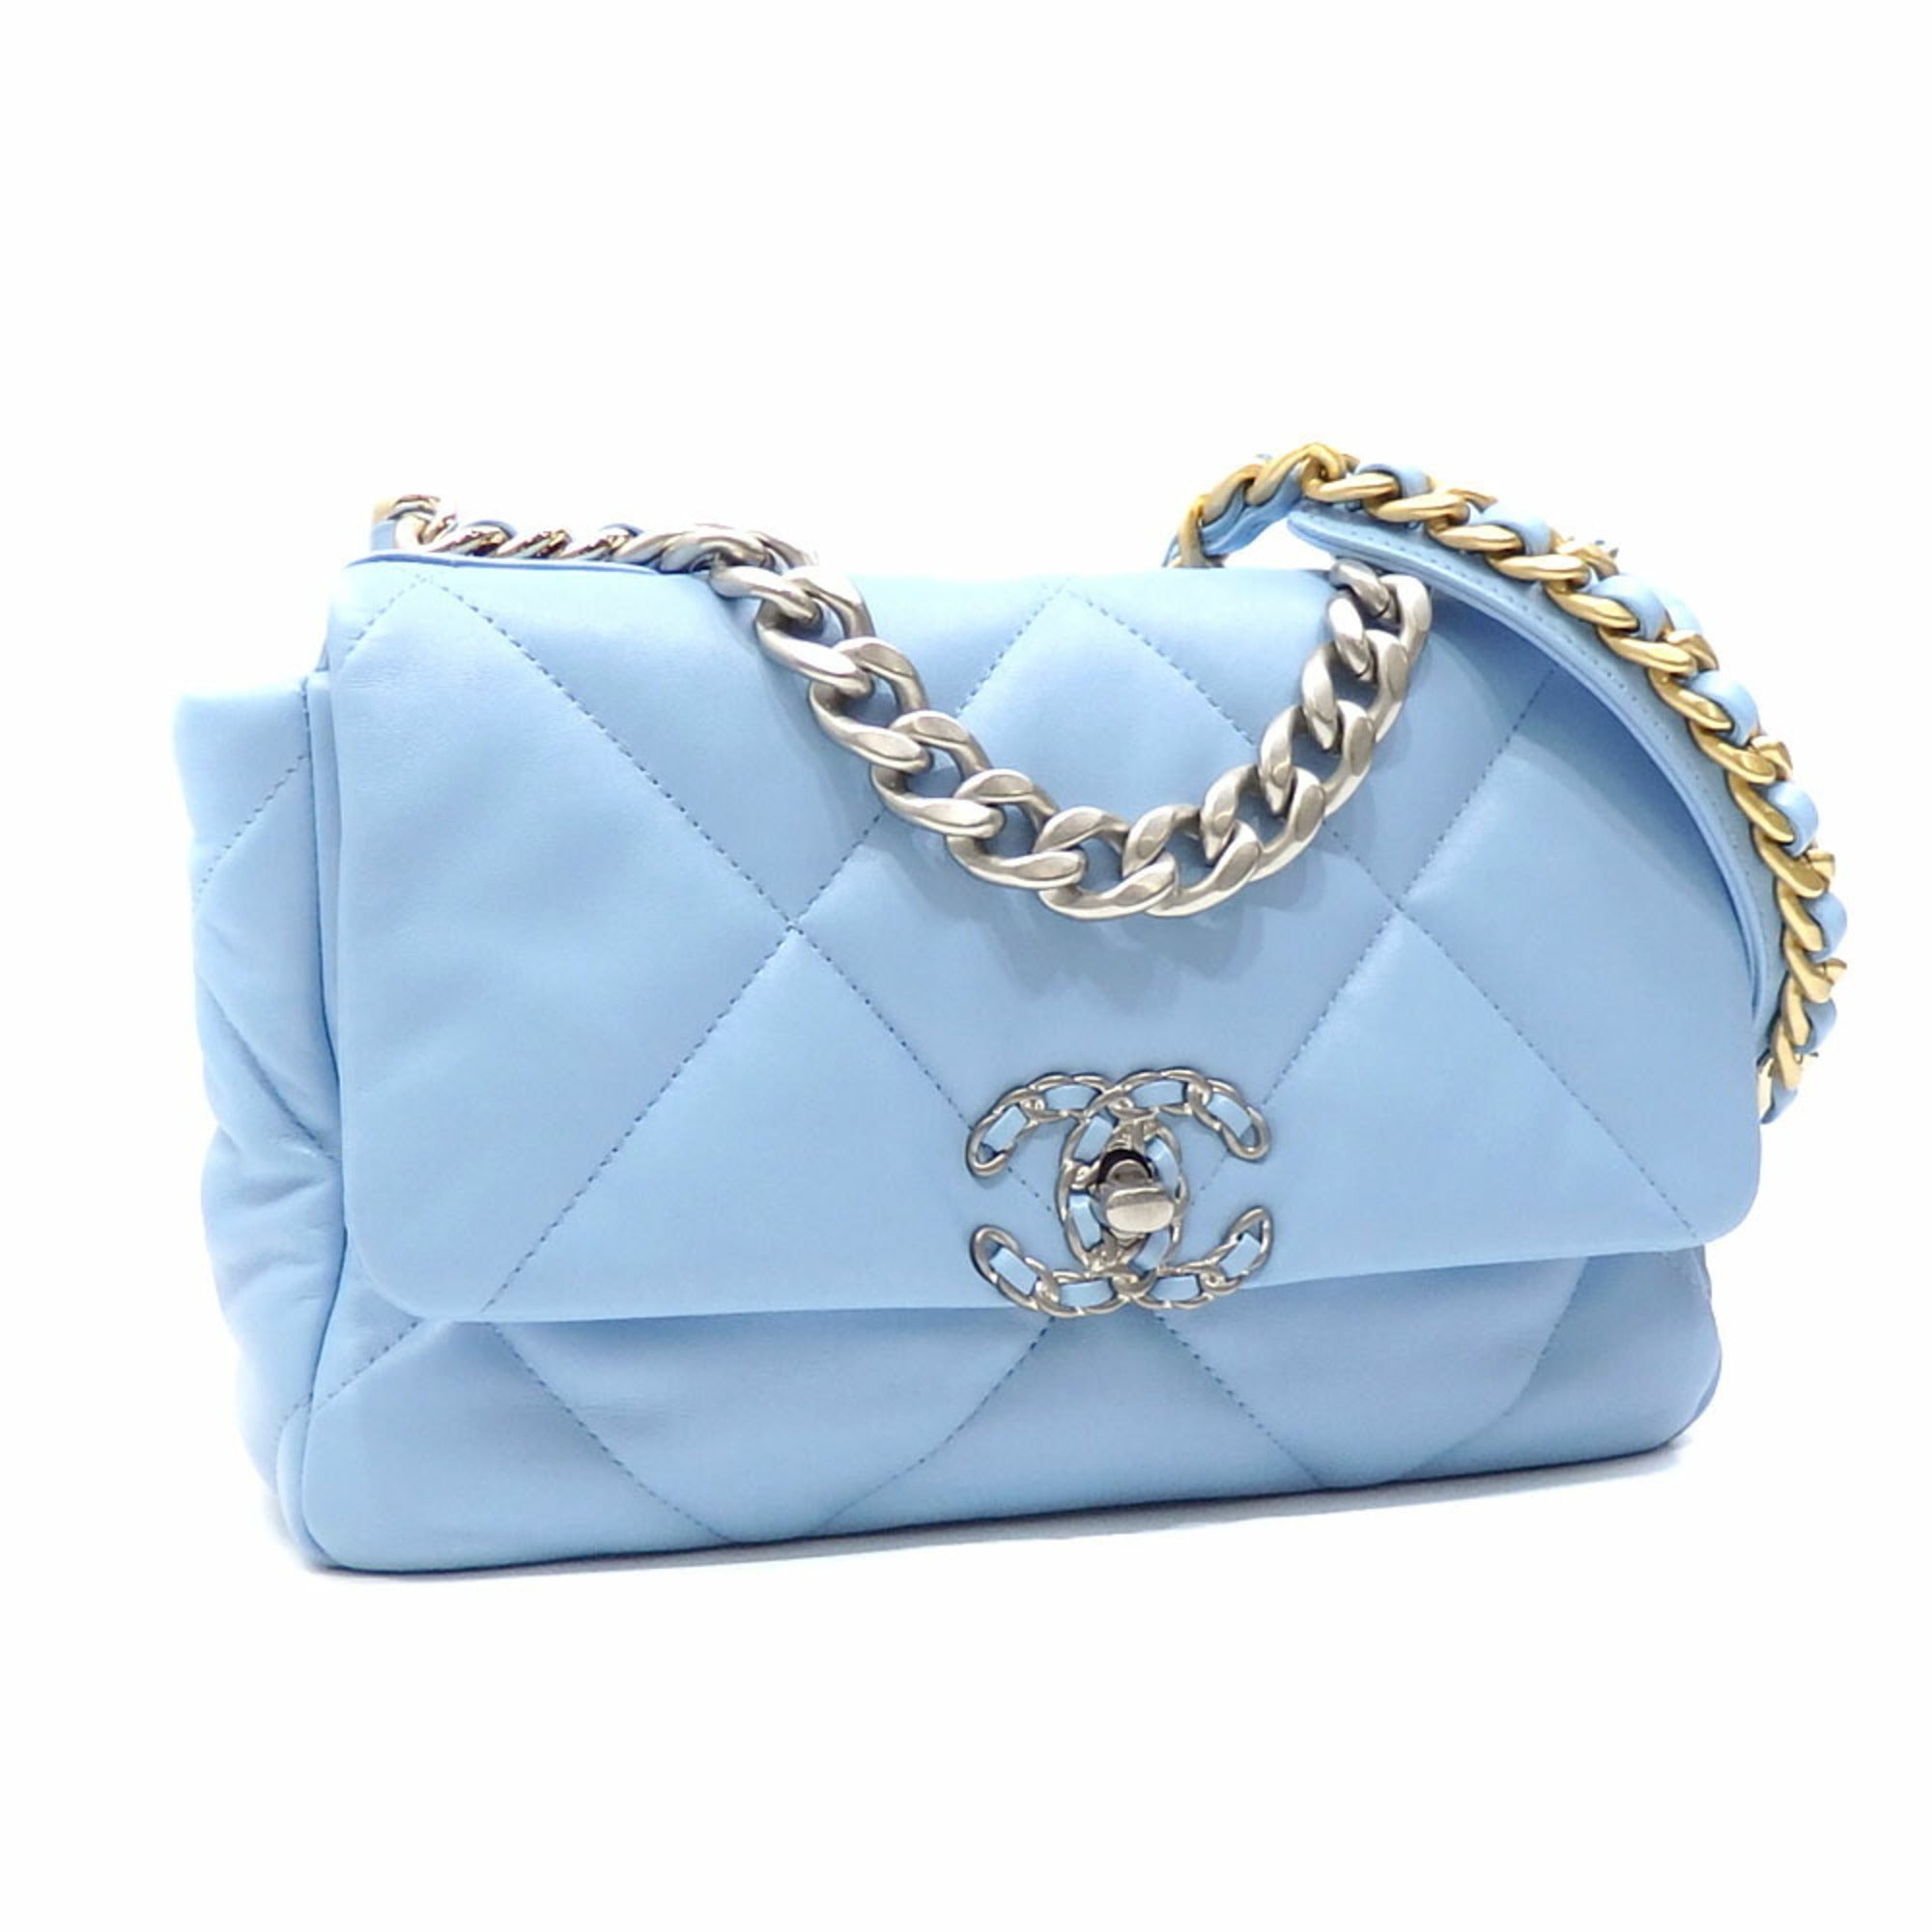 chanel bag official site